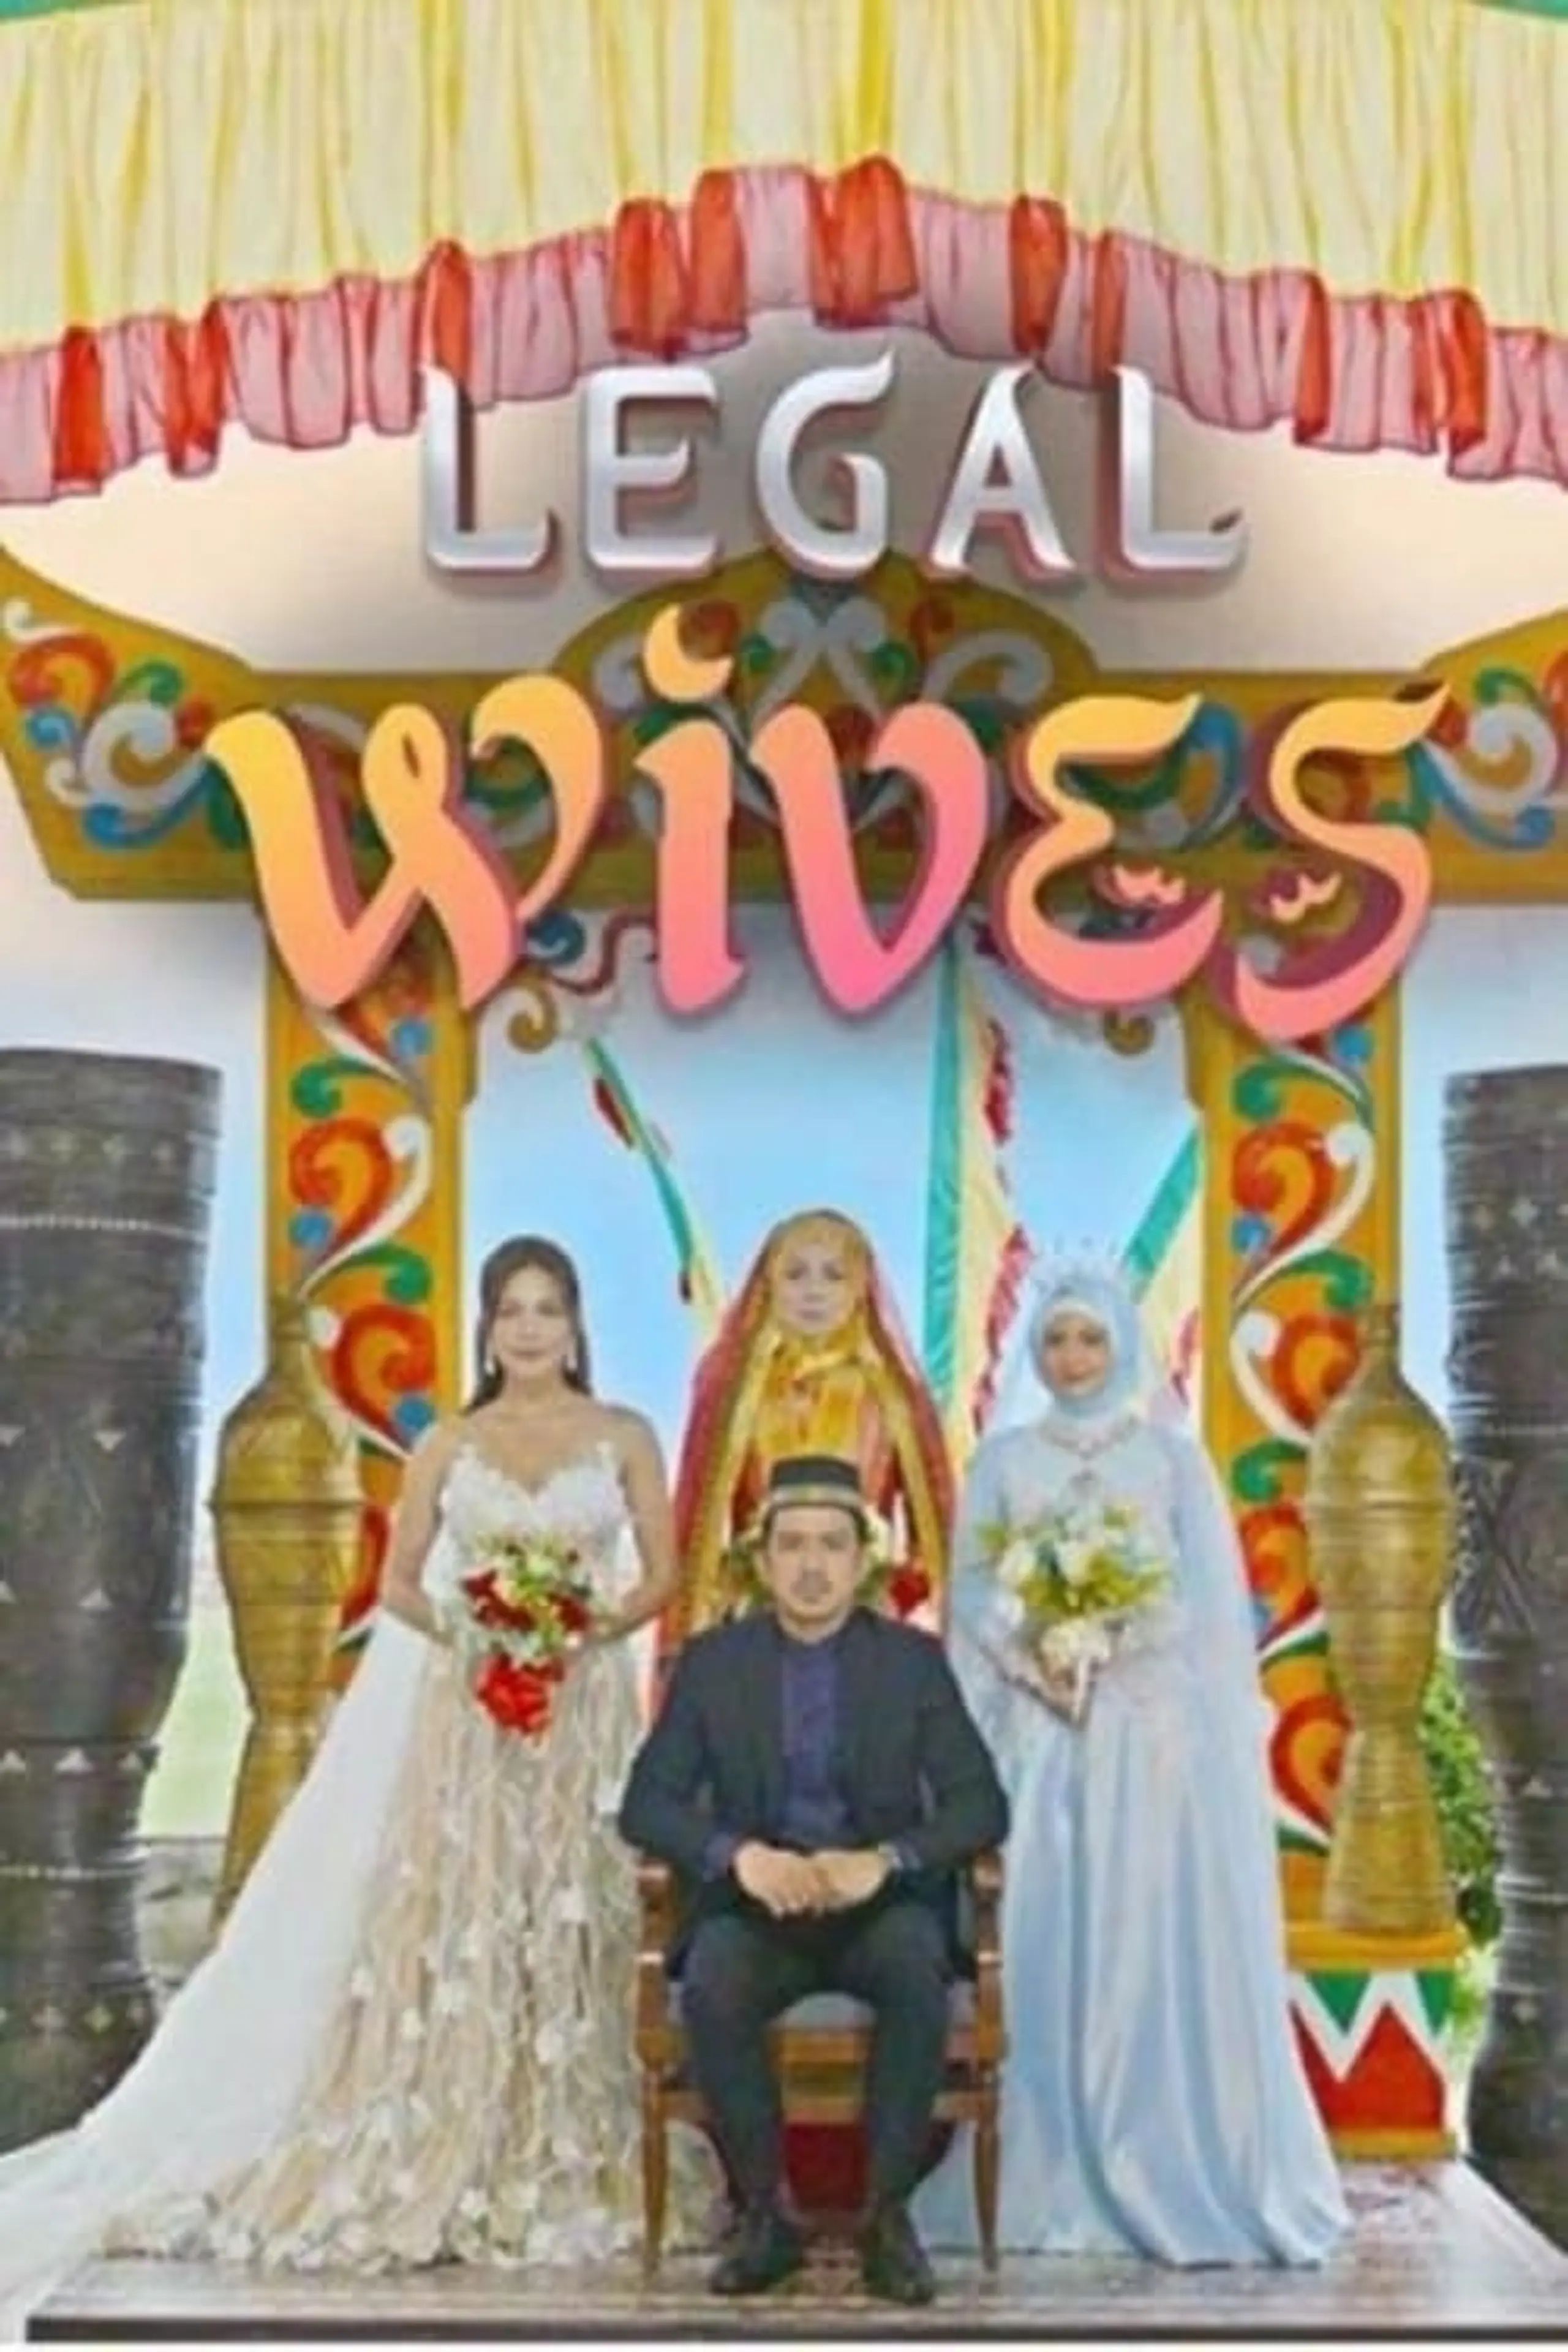 Legal Wives